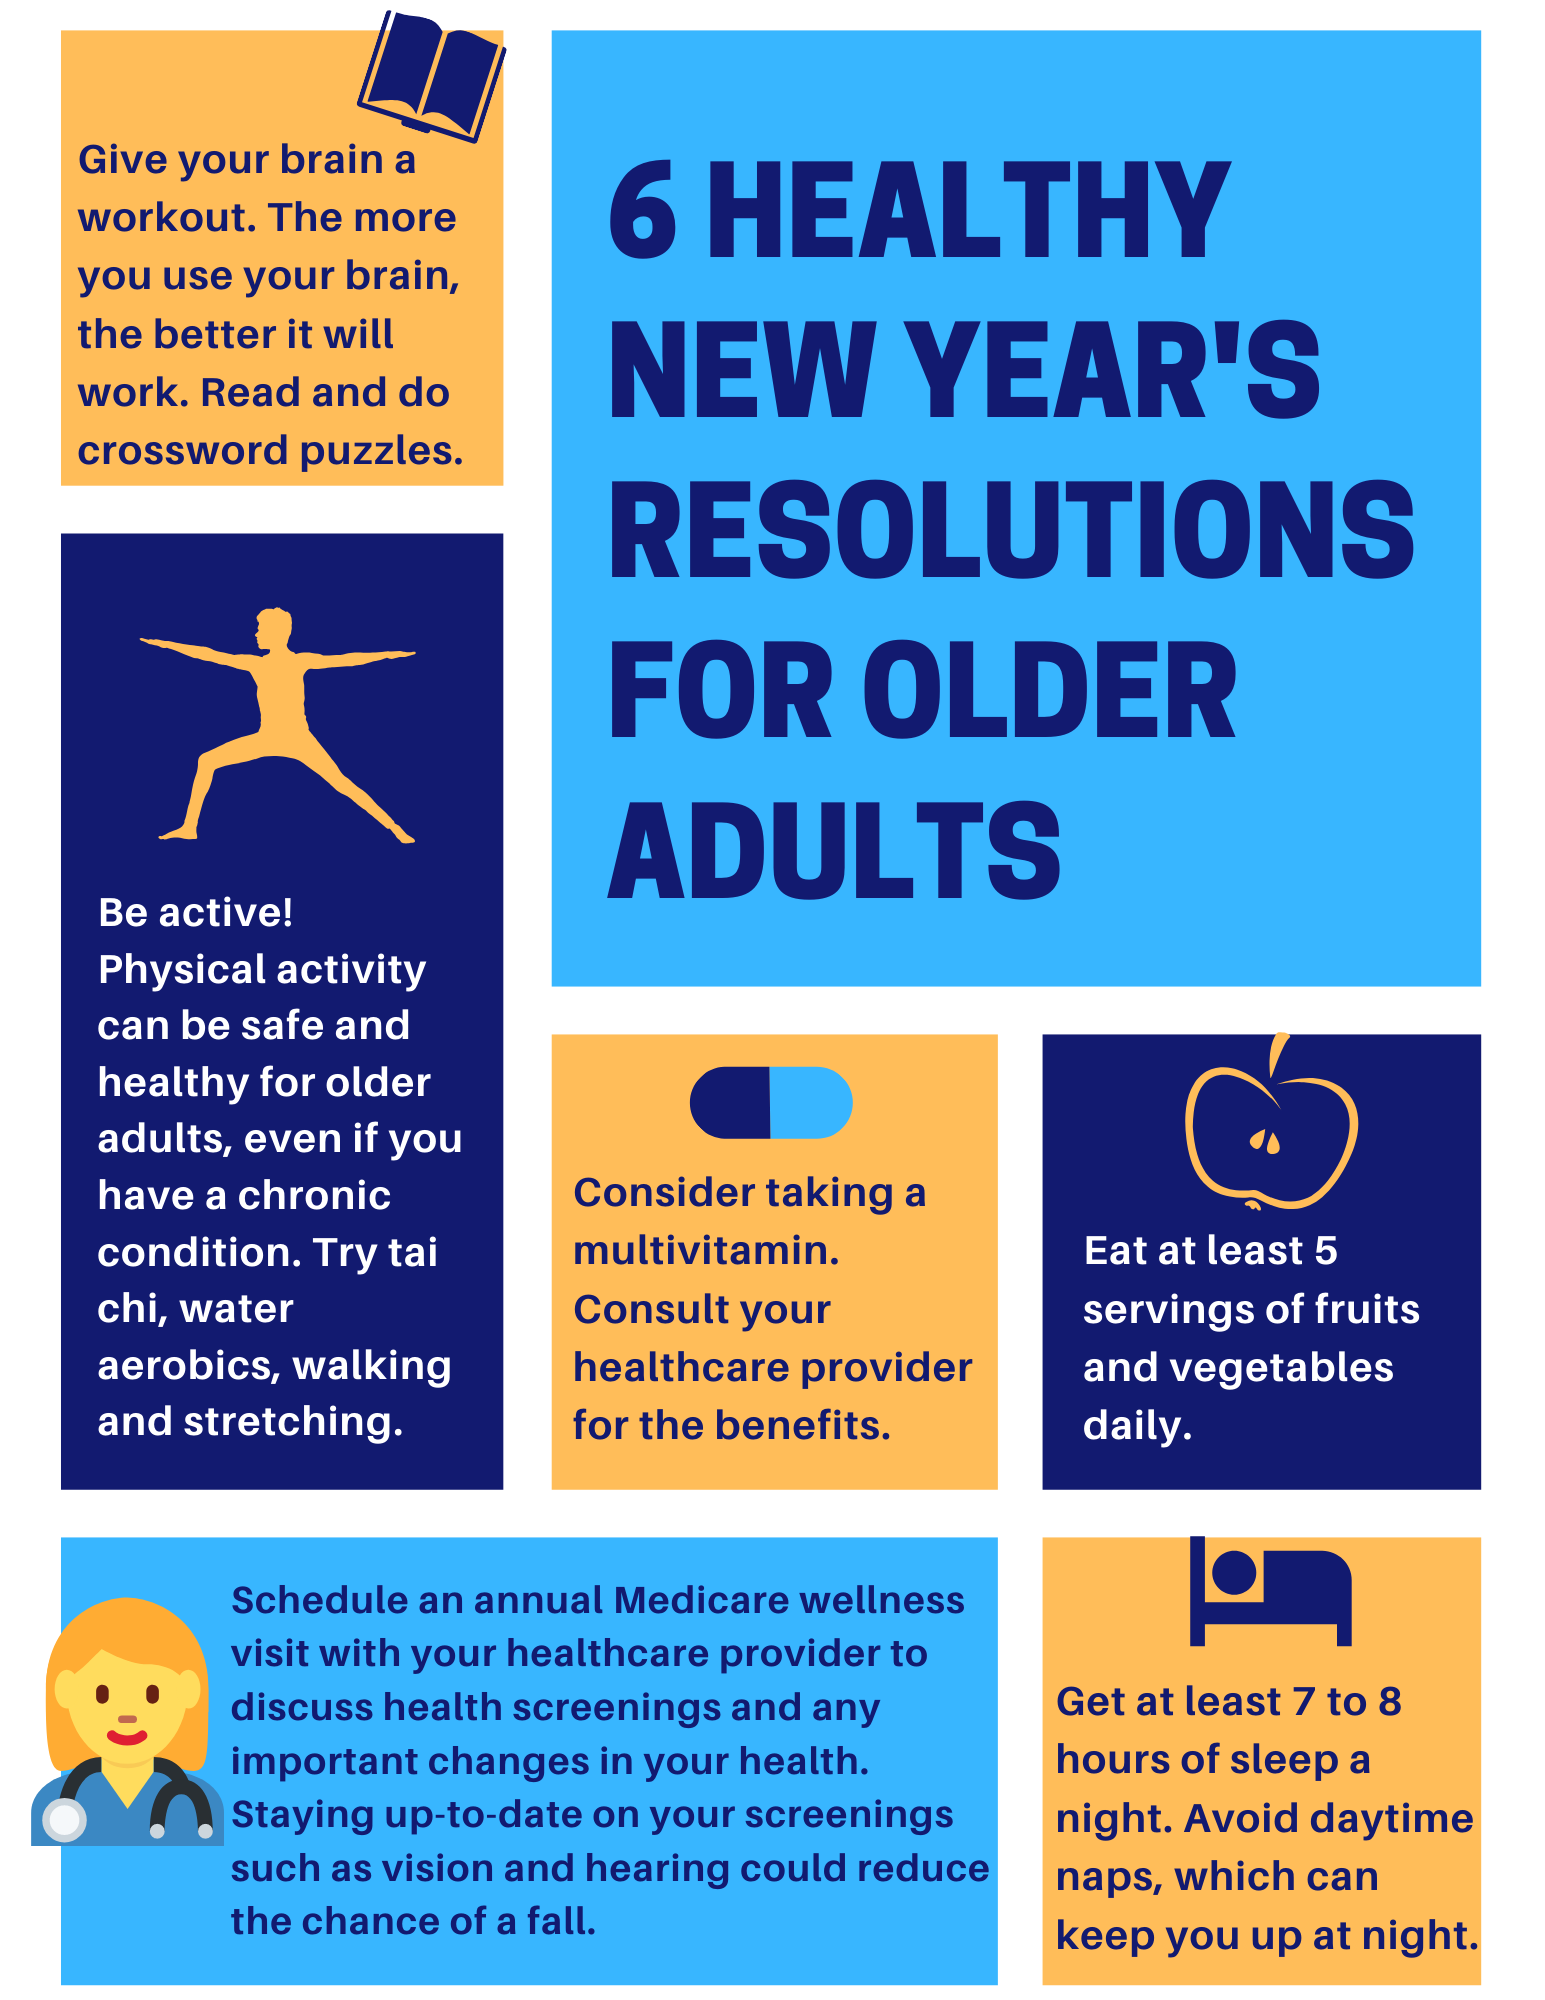 6 Healthy New Year's Resolutions for Older Adults